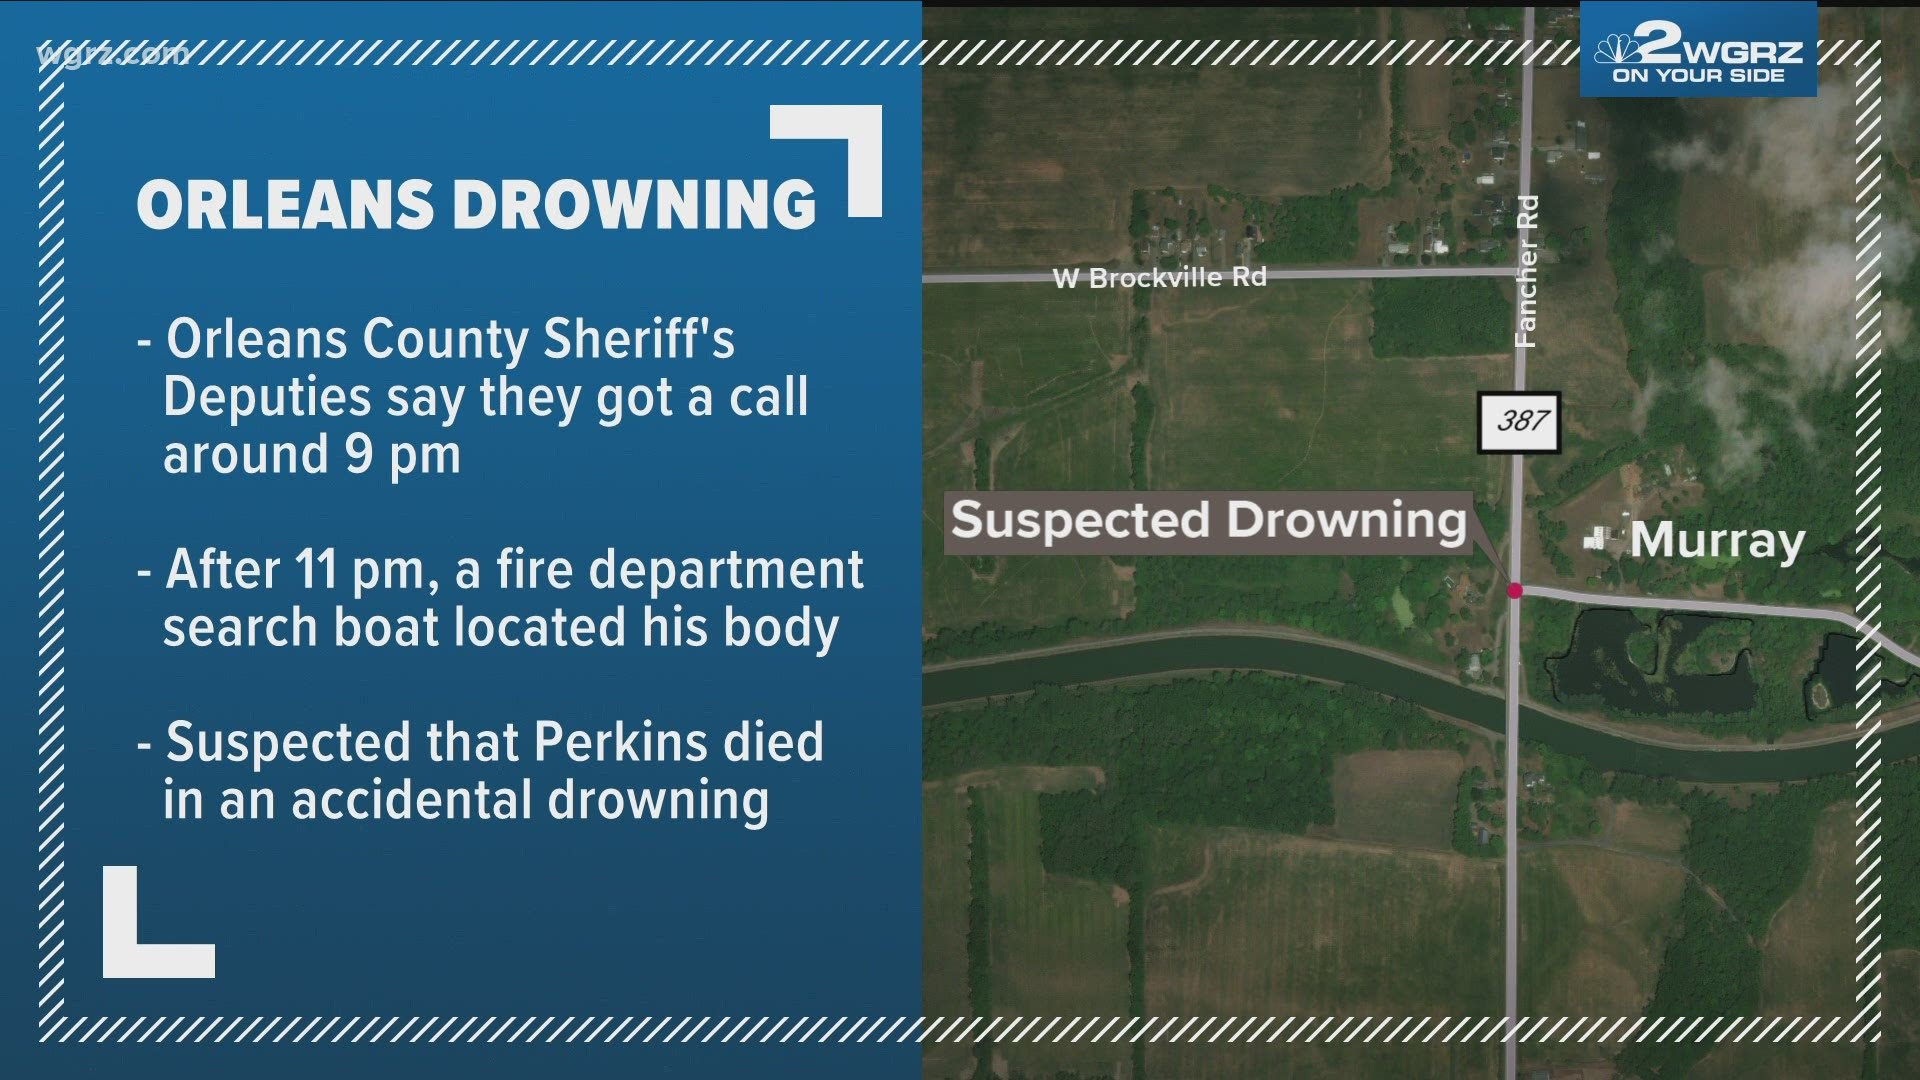 Orleans County Sheriff's Deputies say they got a call around 9 pm about a man in the water yelling for help.